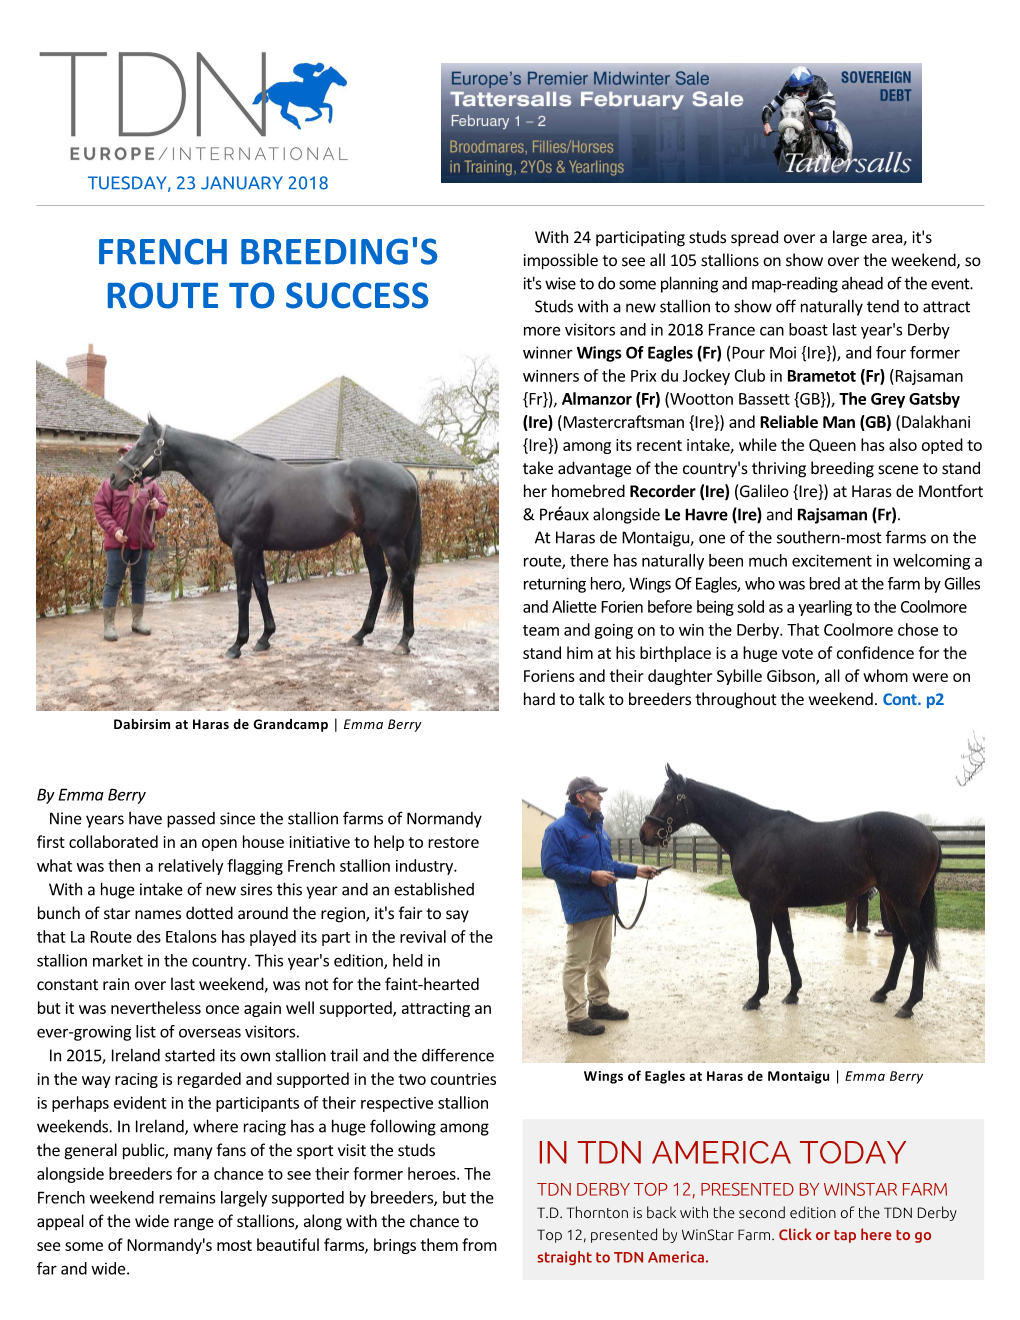 French Breeding's Route to Success